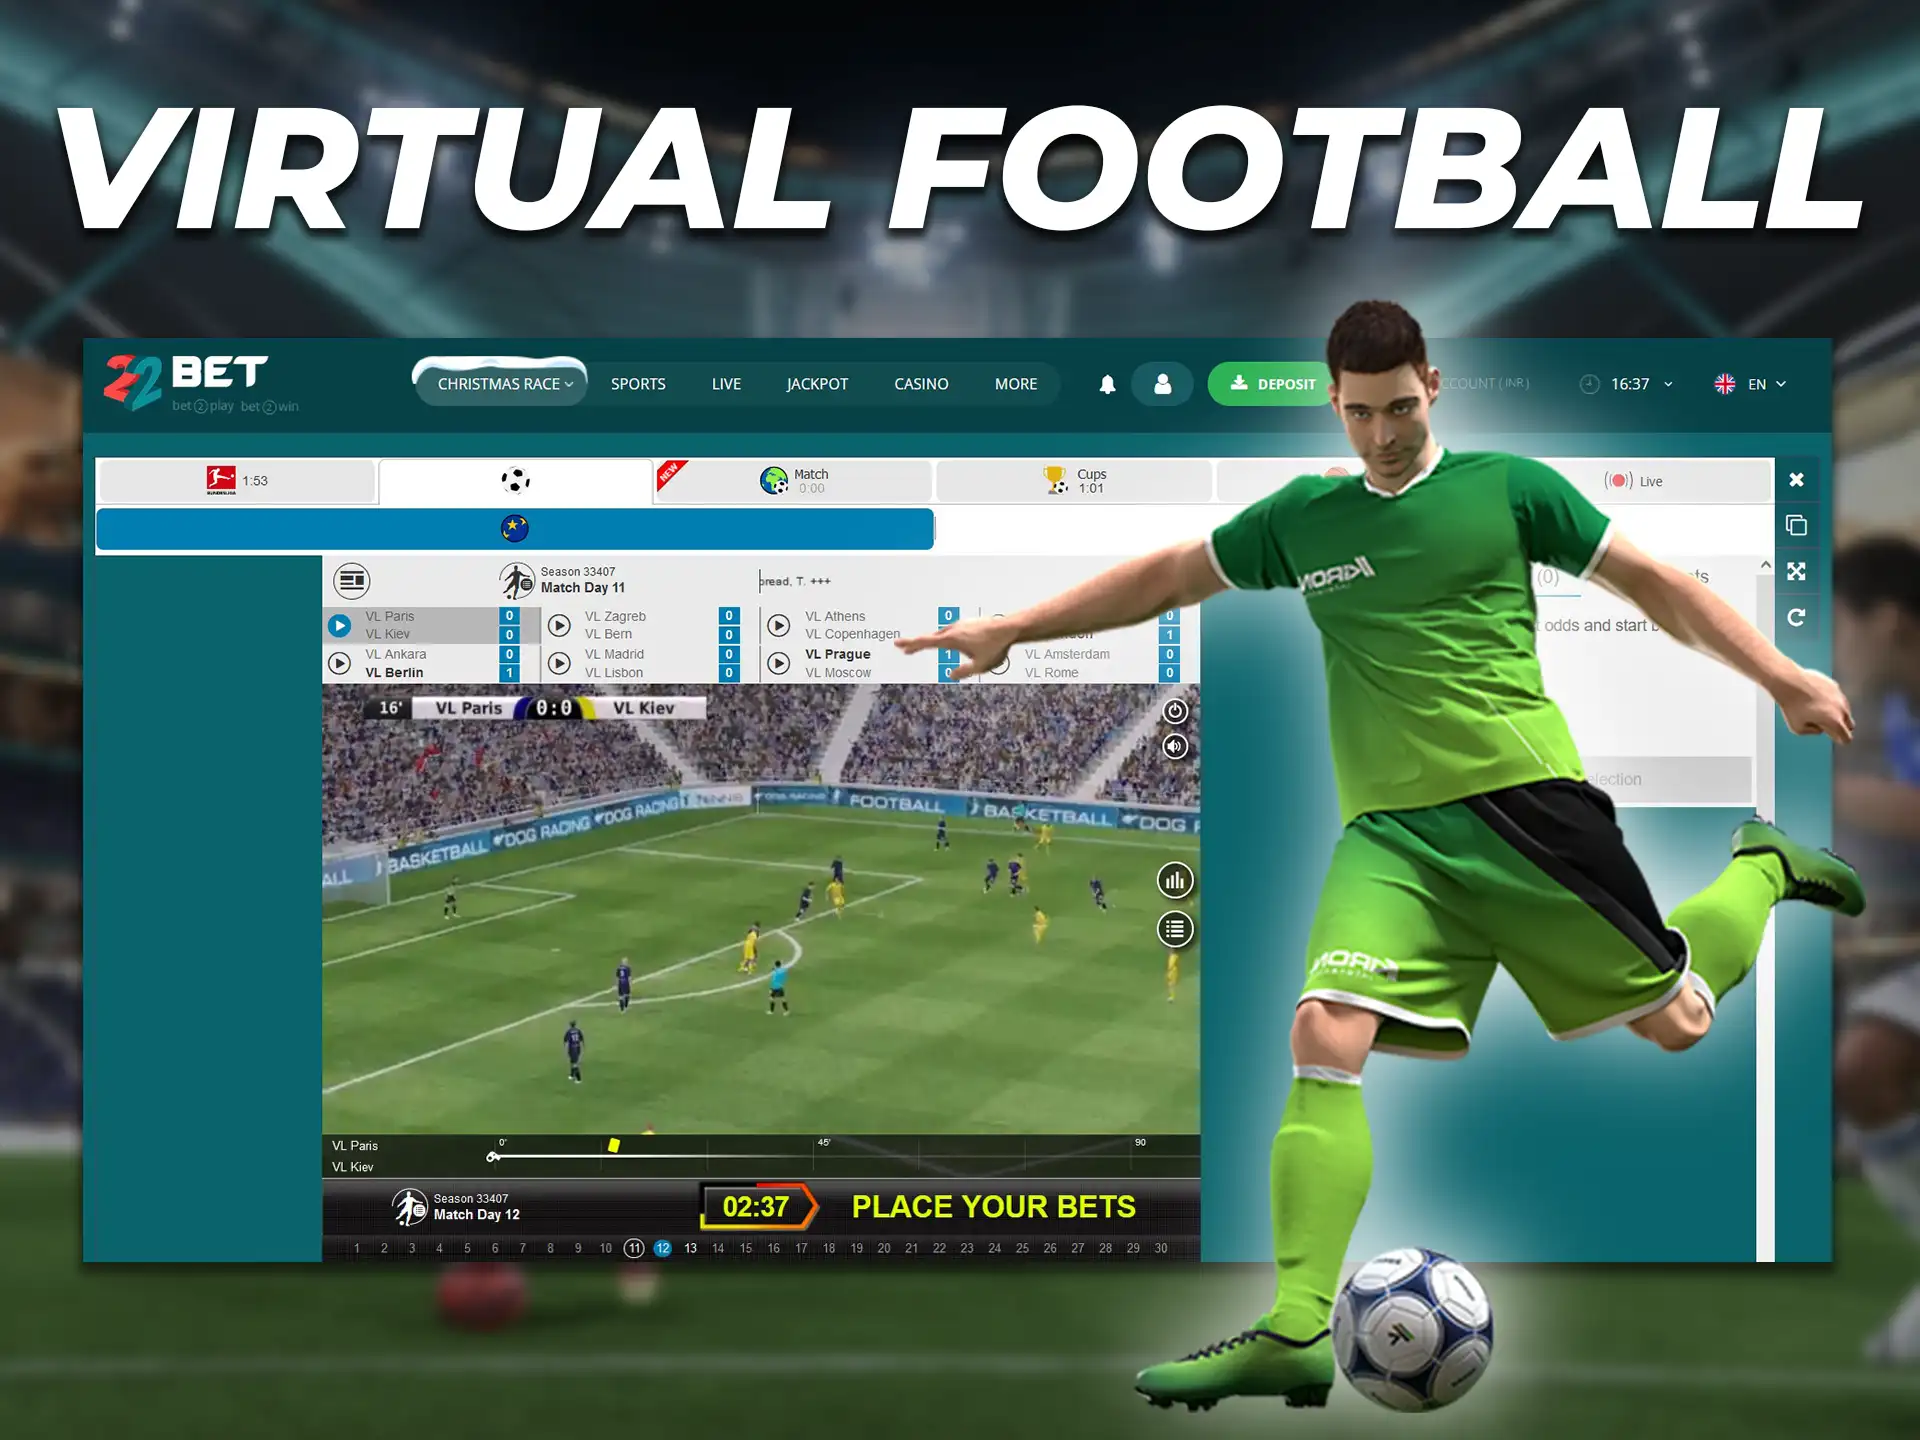 Virtual football is a popular sport for betting.